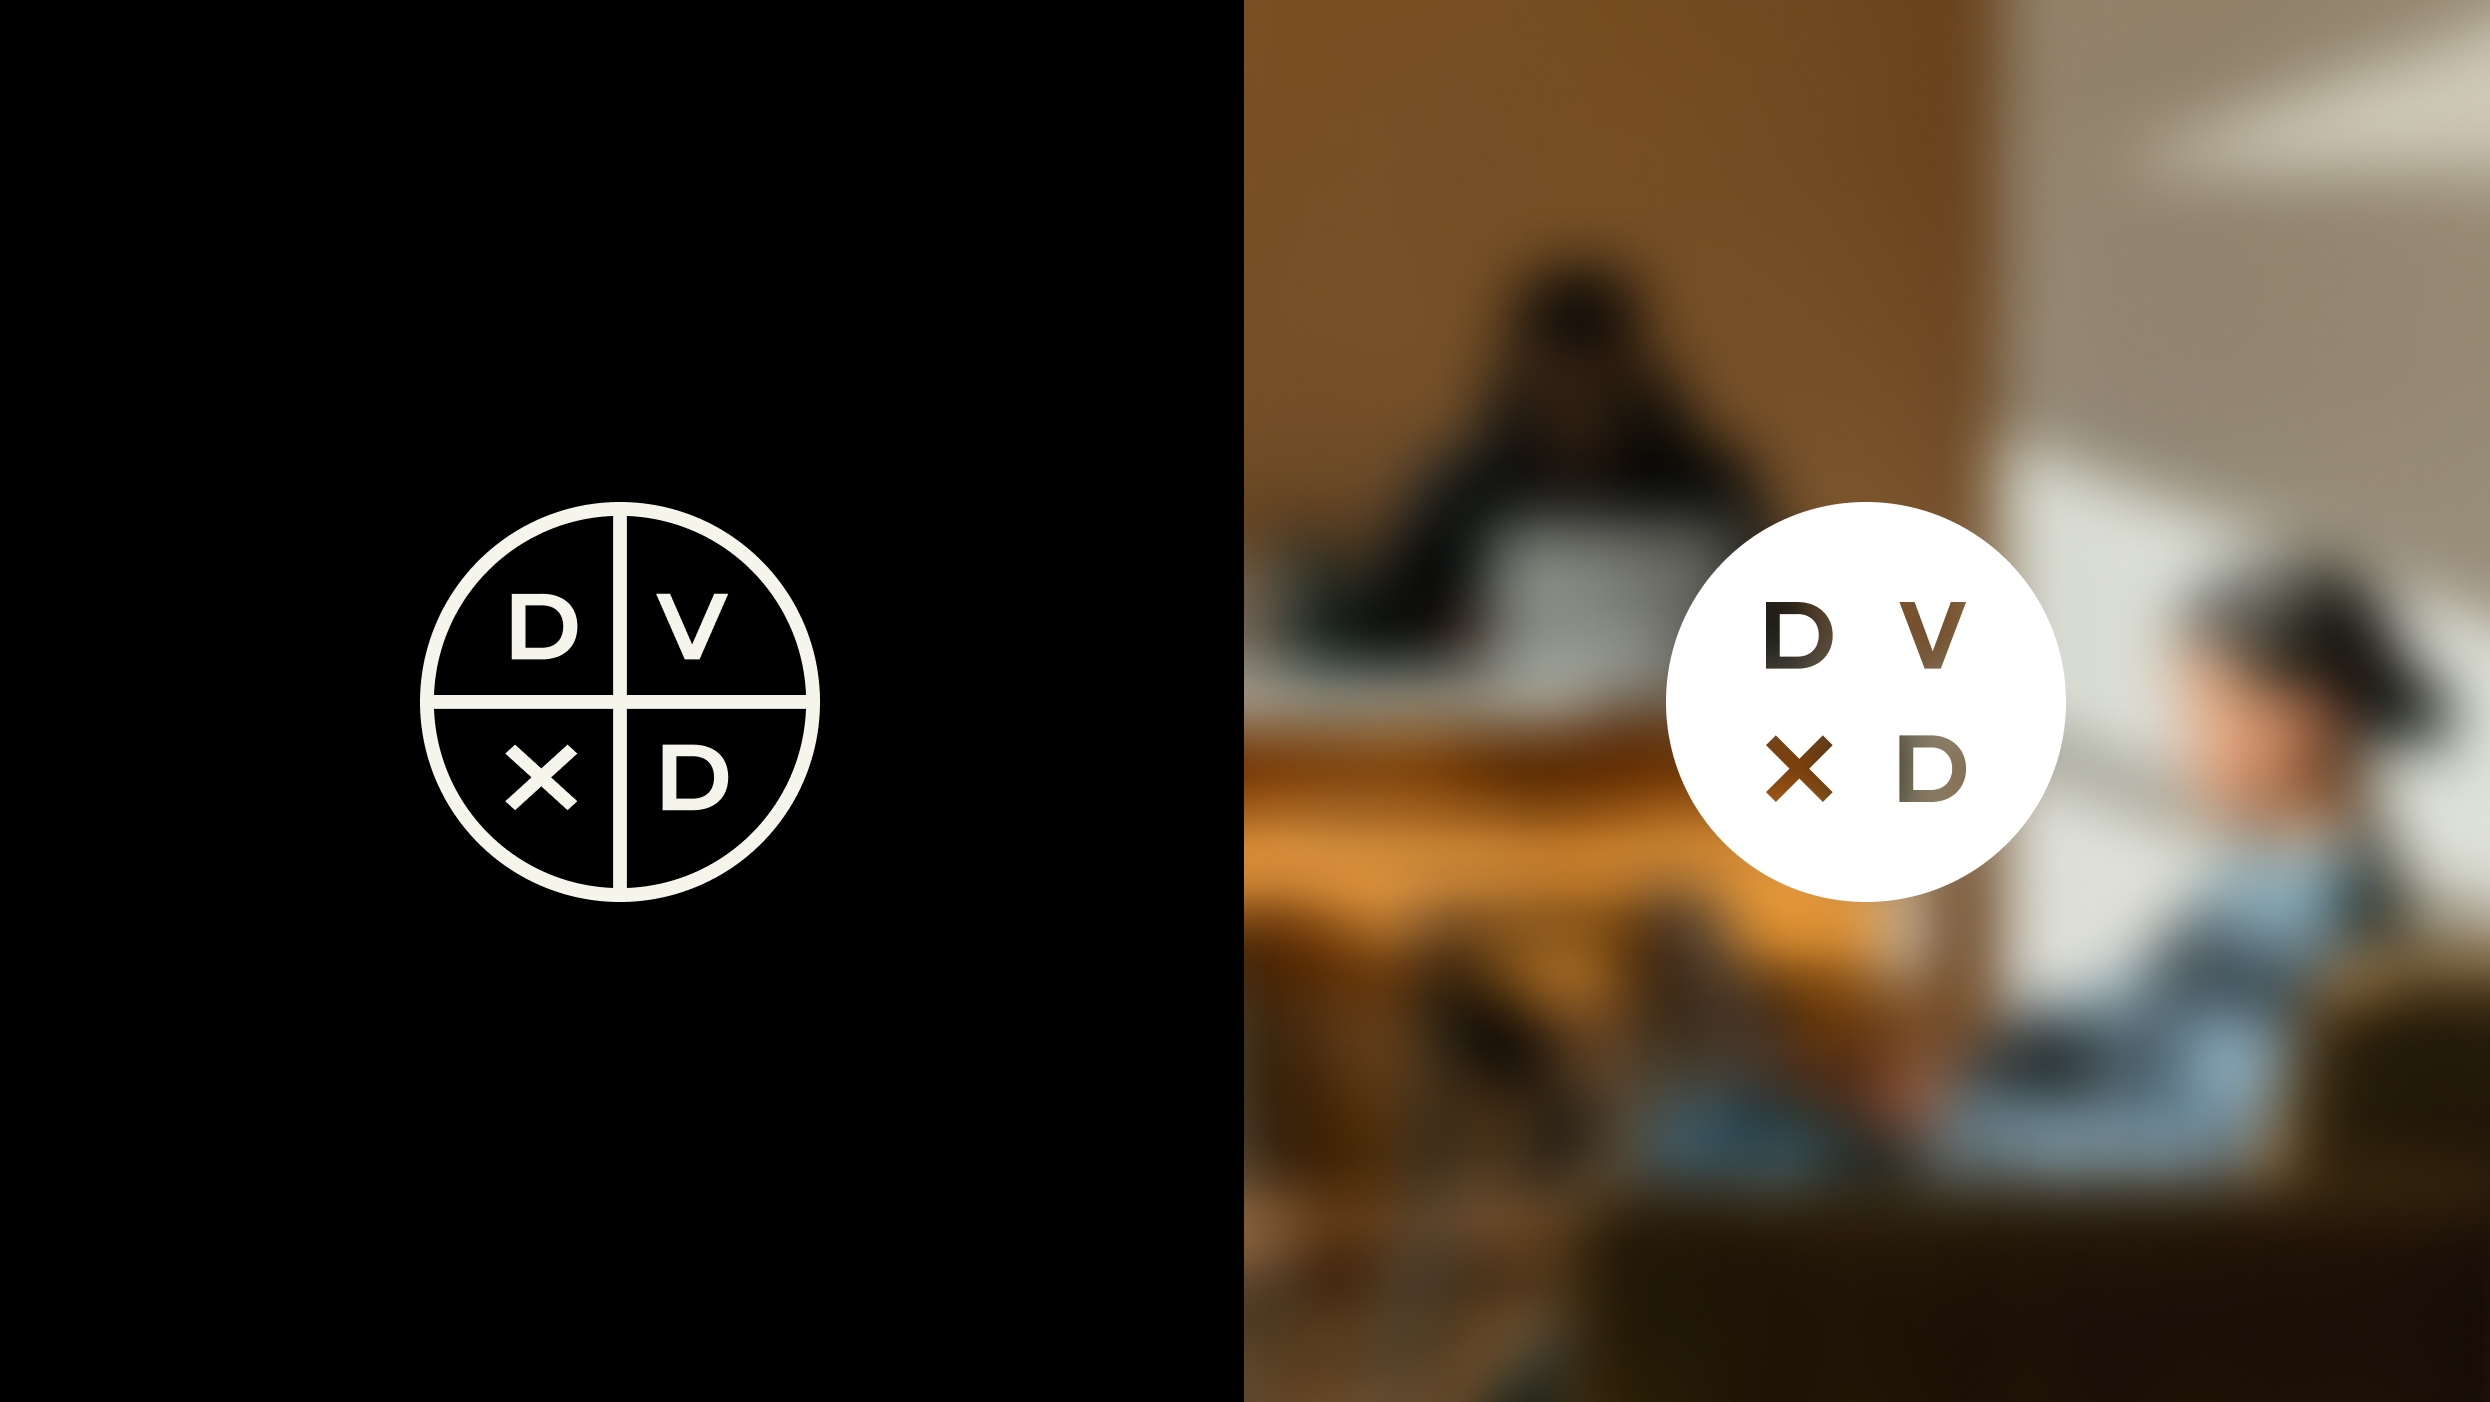 A comparison of the former and updated DVXD logo